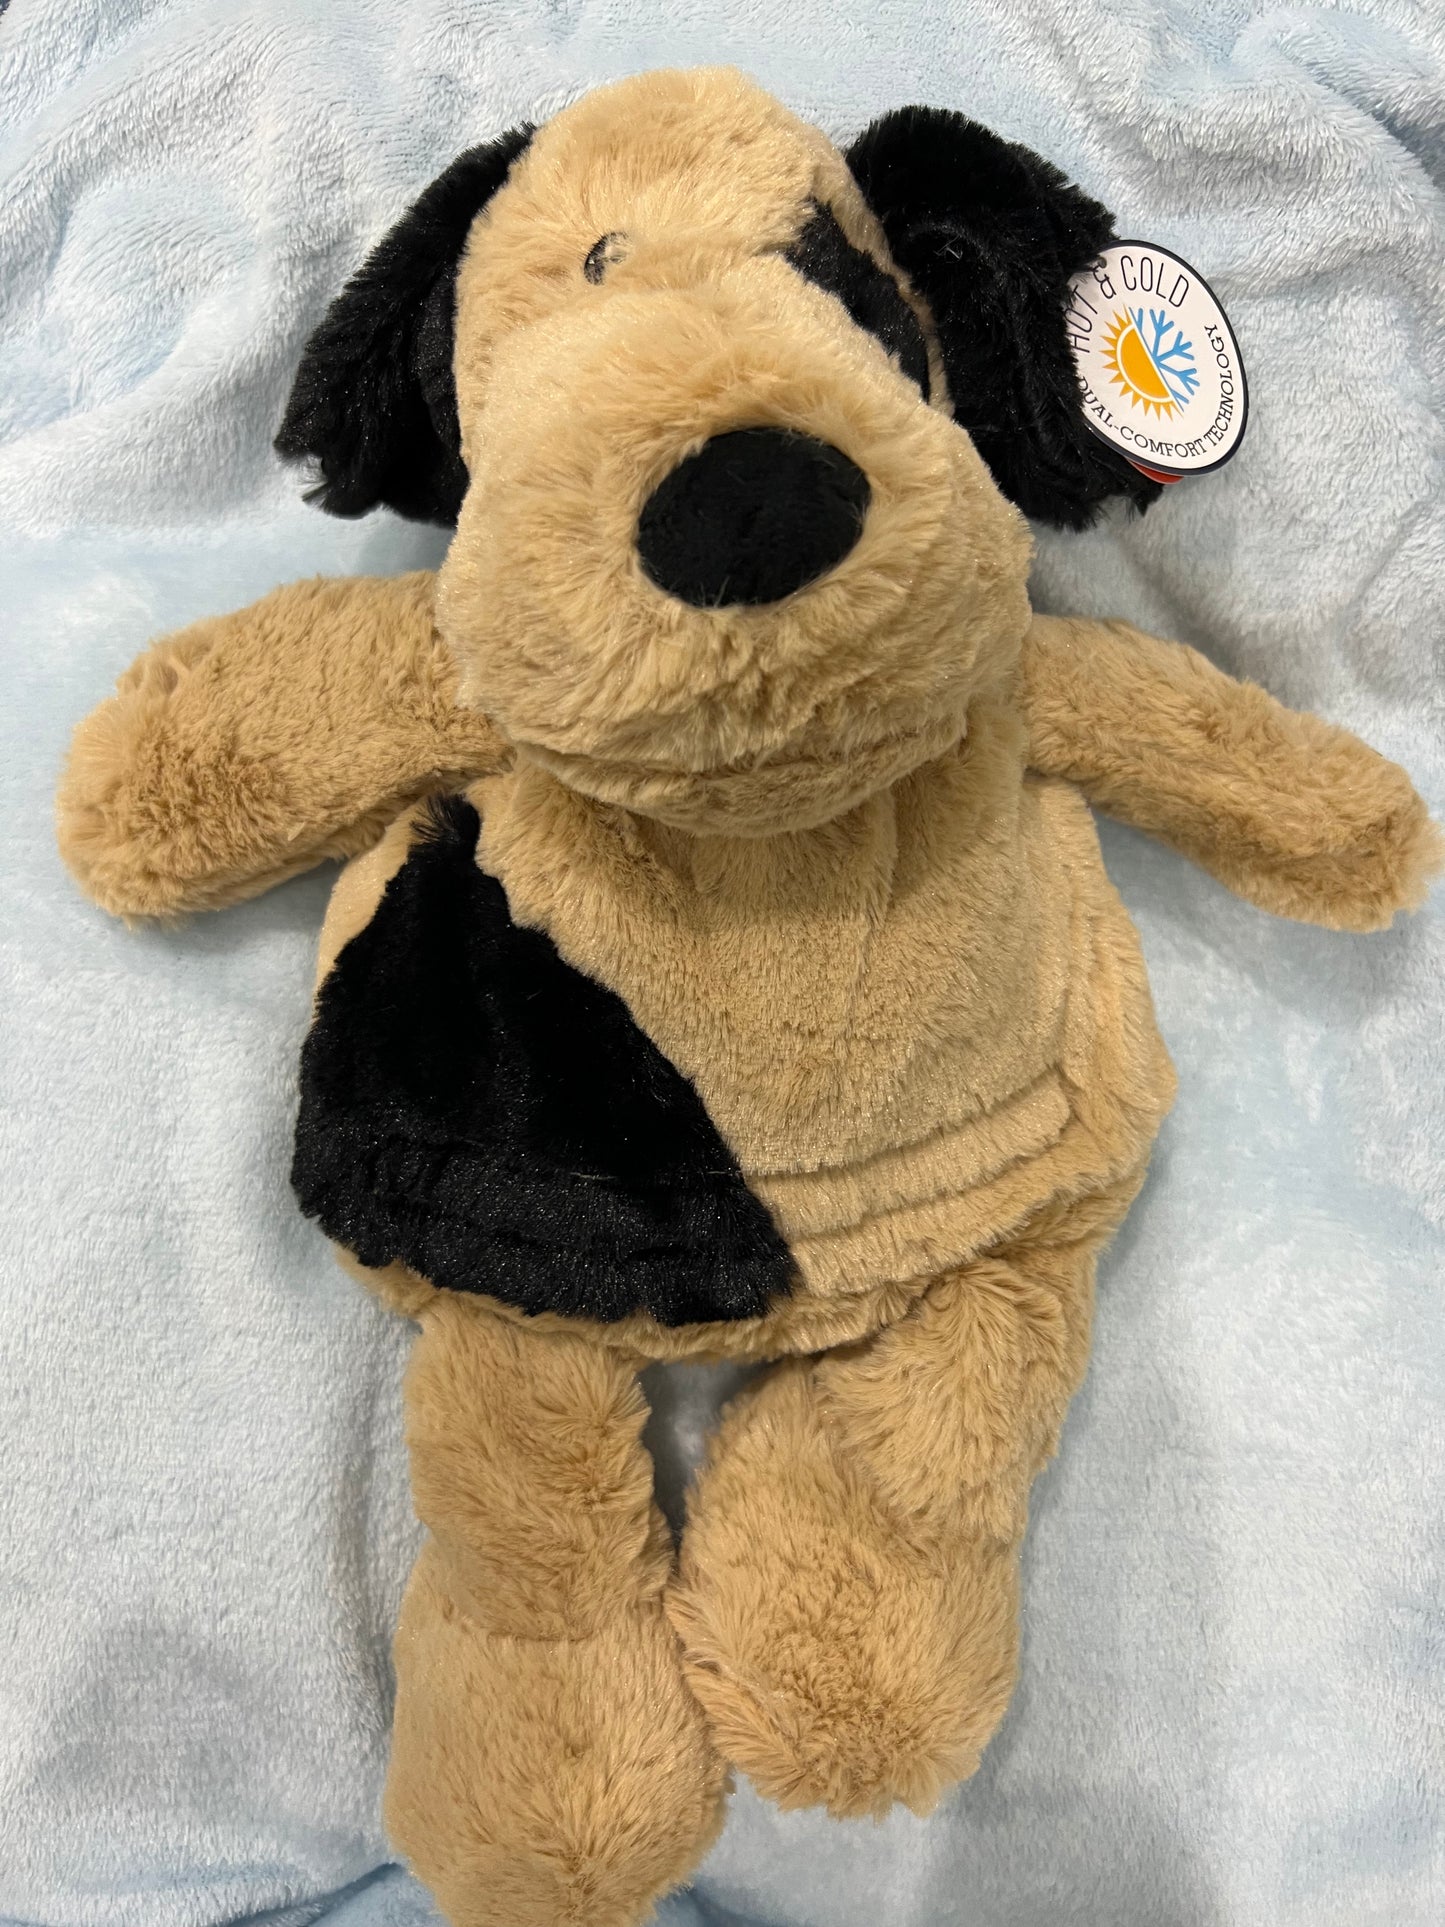 Weighted Plush Animals for people living with dementia - for Anxiety, Sensory Input or Companshionship - Calming Lap Animal